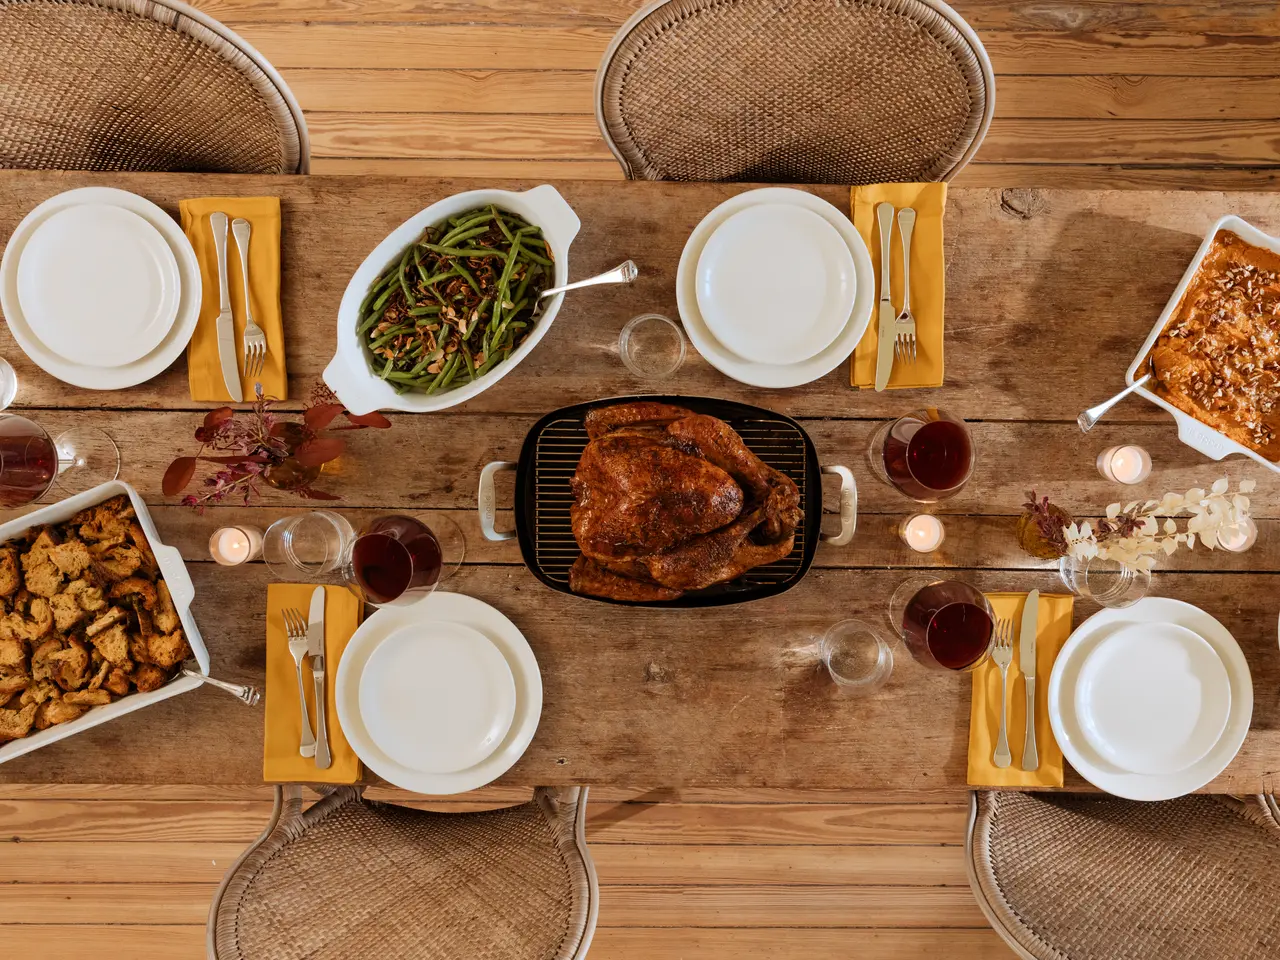 A top-down view of a rustic dining table set for a meal with a roasted chicken centerpiece, surrounded by various side dishes, cutlery, napkins, and glasses of wine.